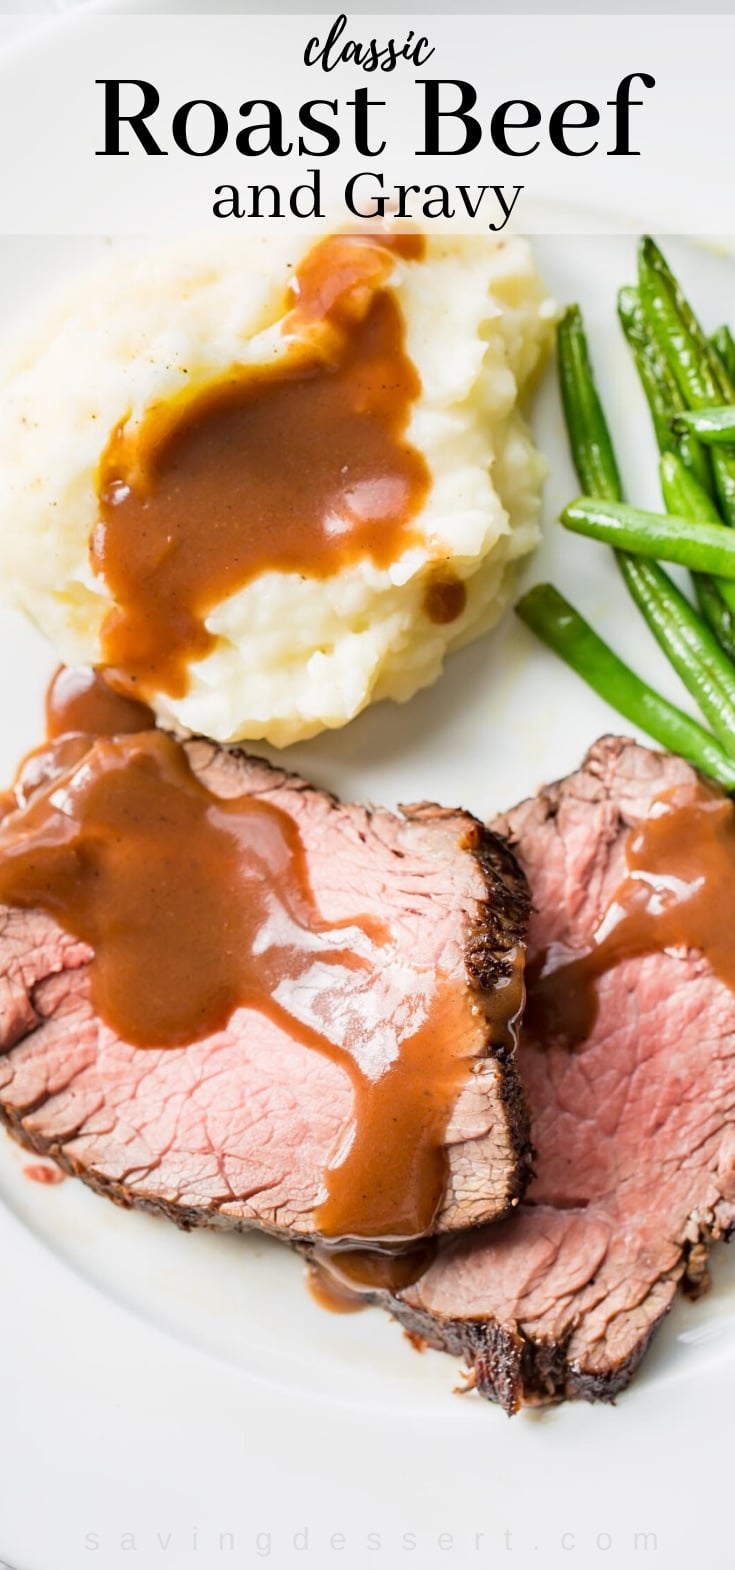 A plate filled with classic roast beef and gravy with mashed potatoes and green beans